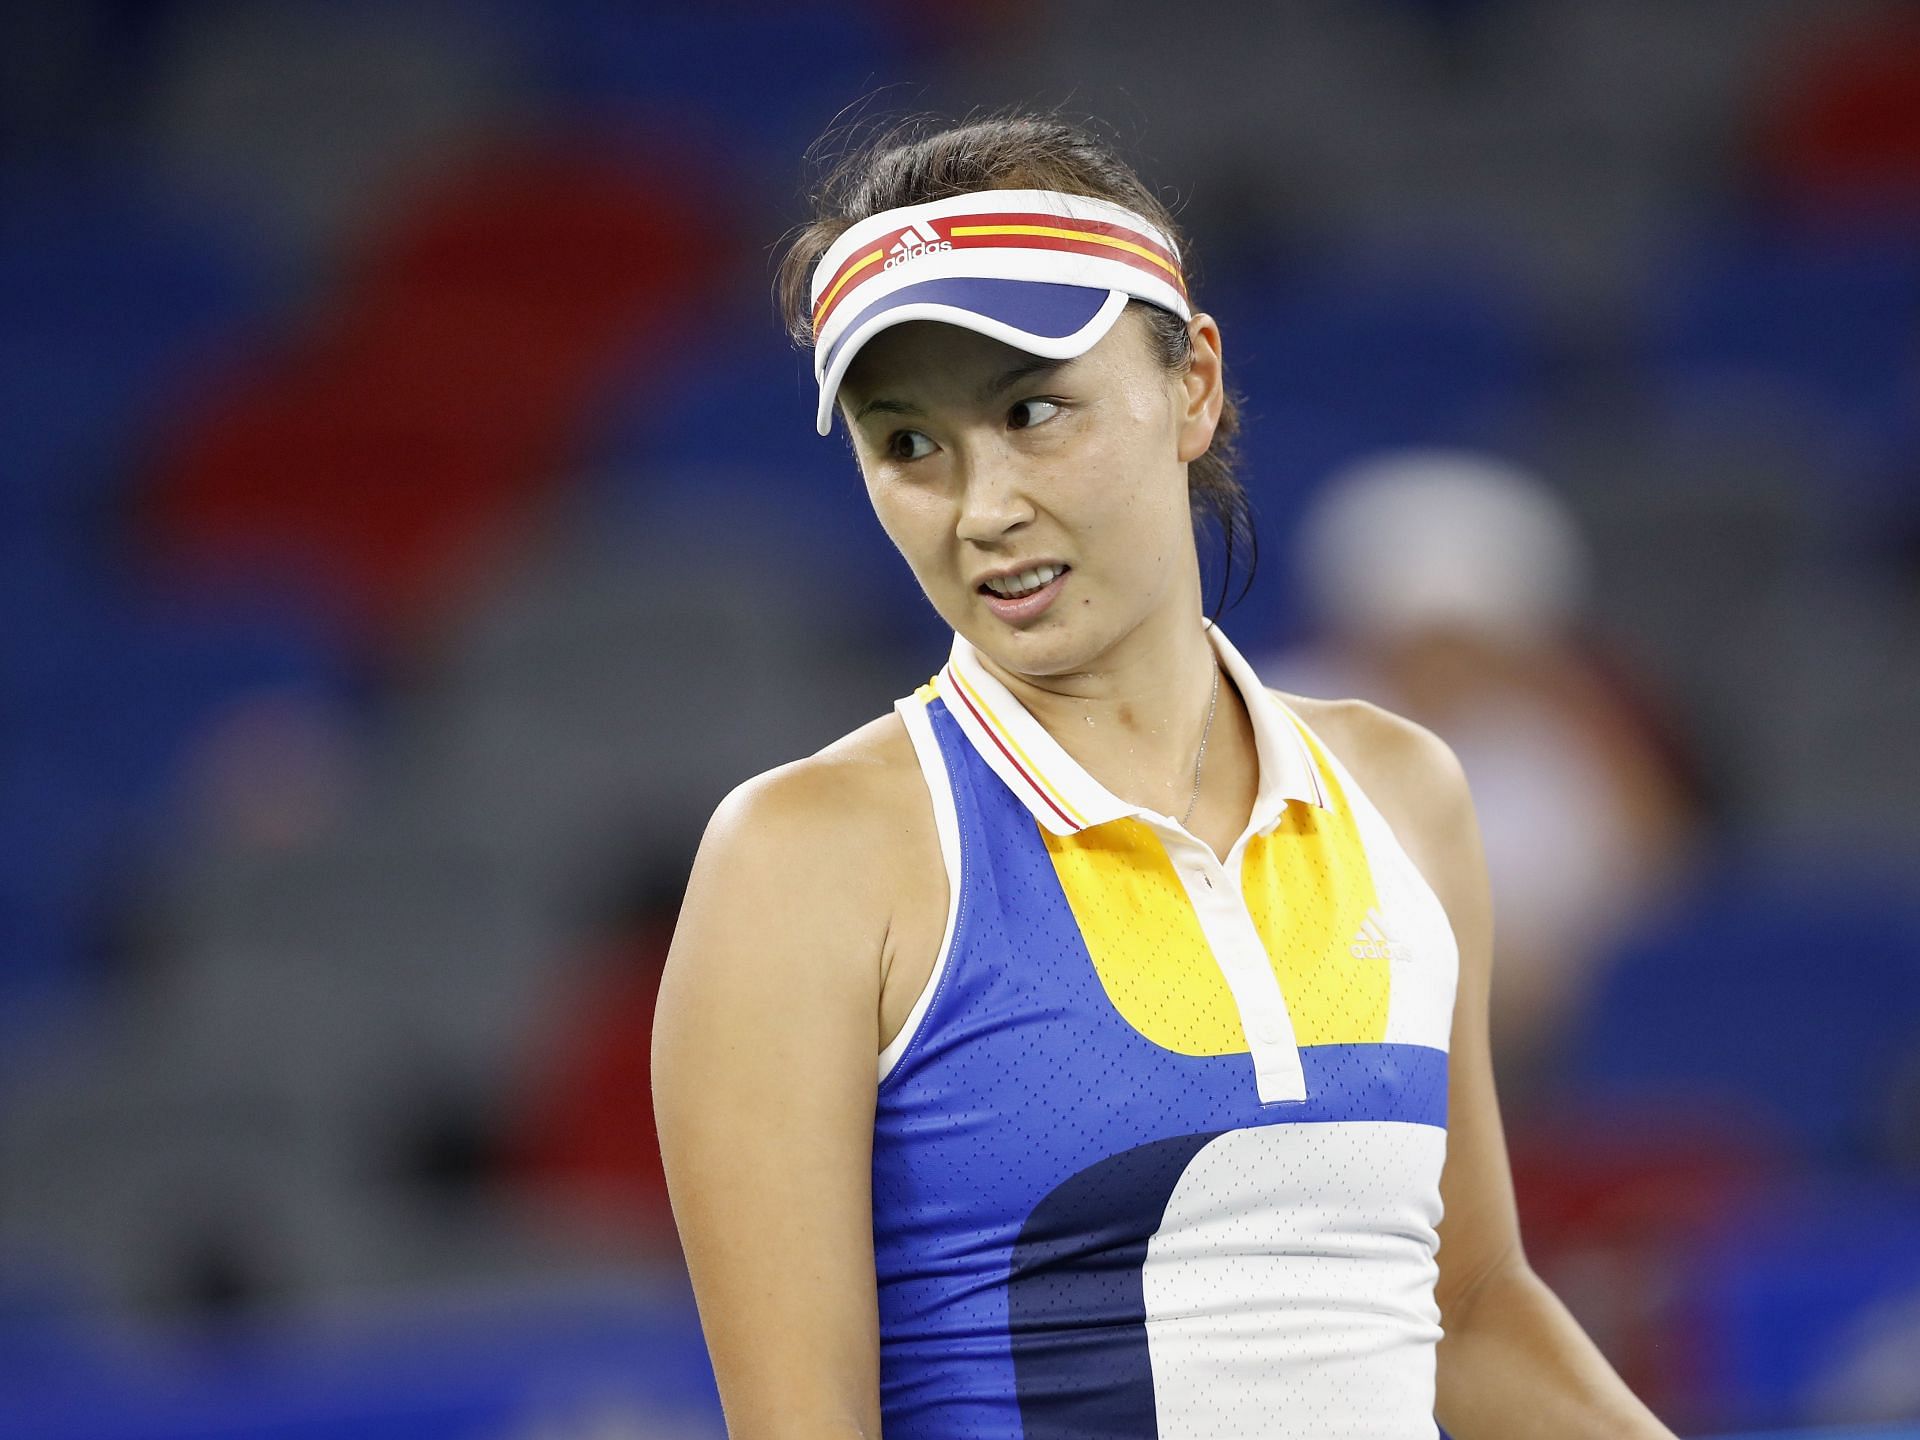 Peng Shuai is facing censoring in China following her allegations against a top politician.